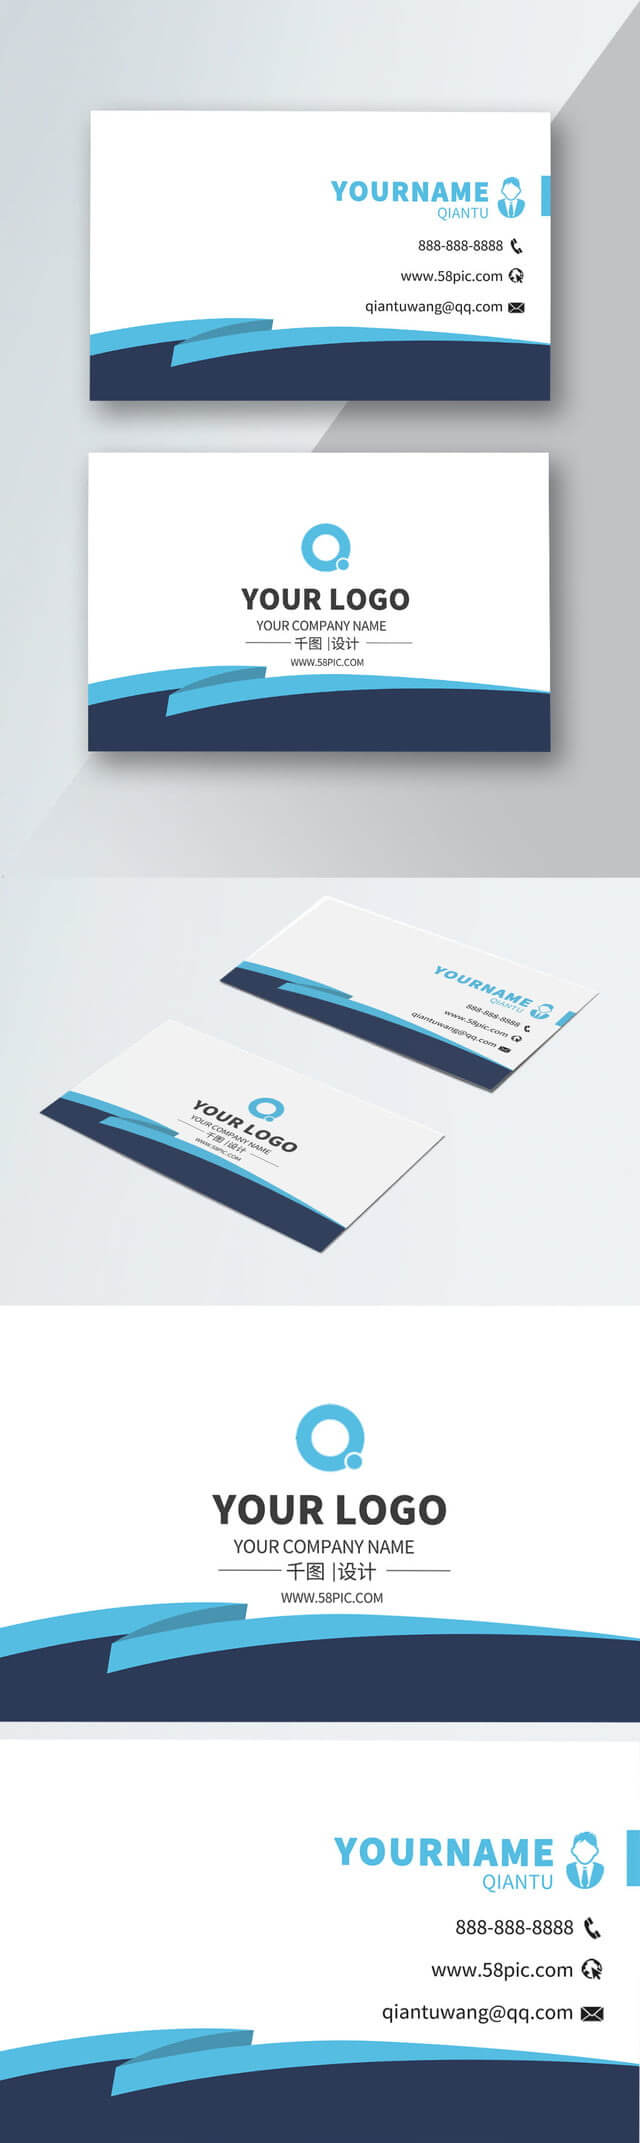 Advertising Company Business Card Material Download Pertaining To Advertising Cards Templates